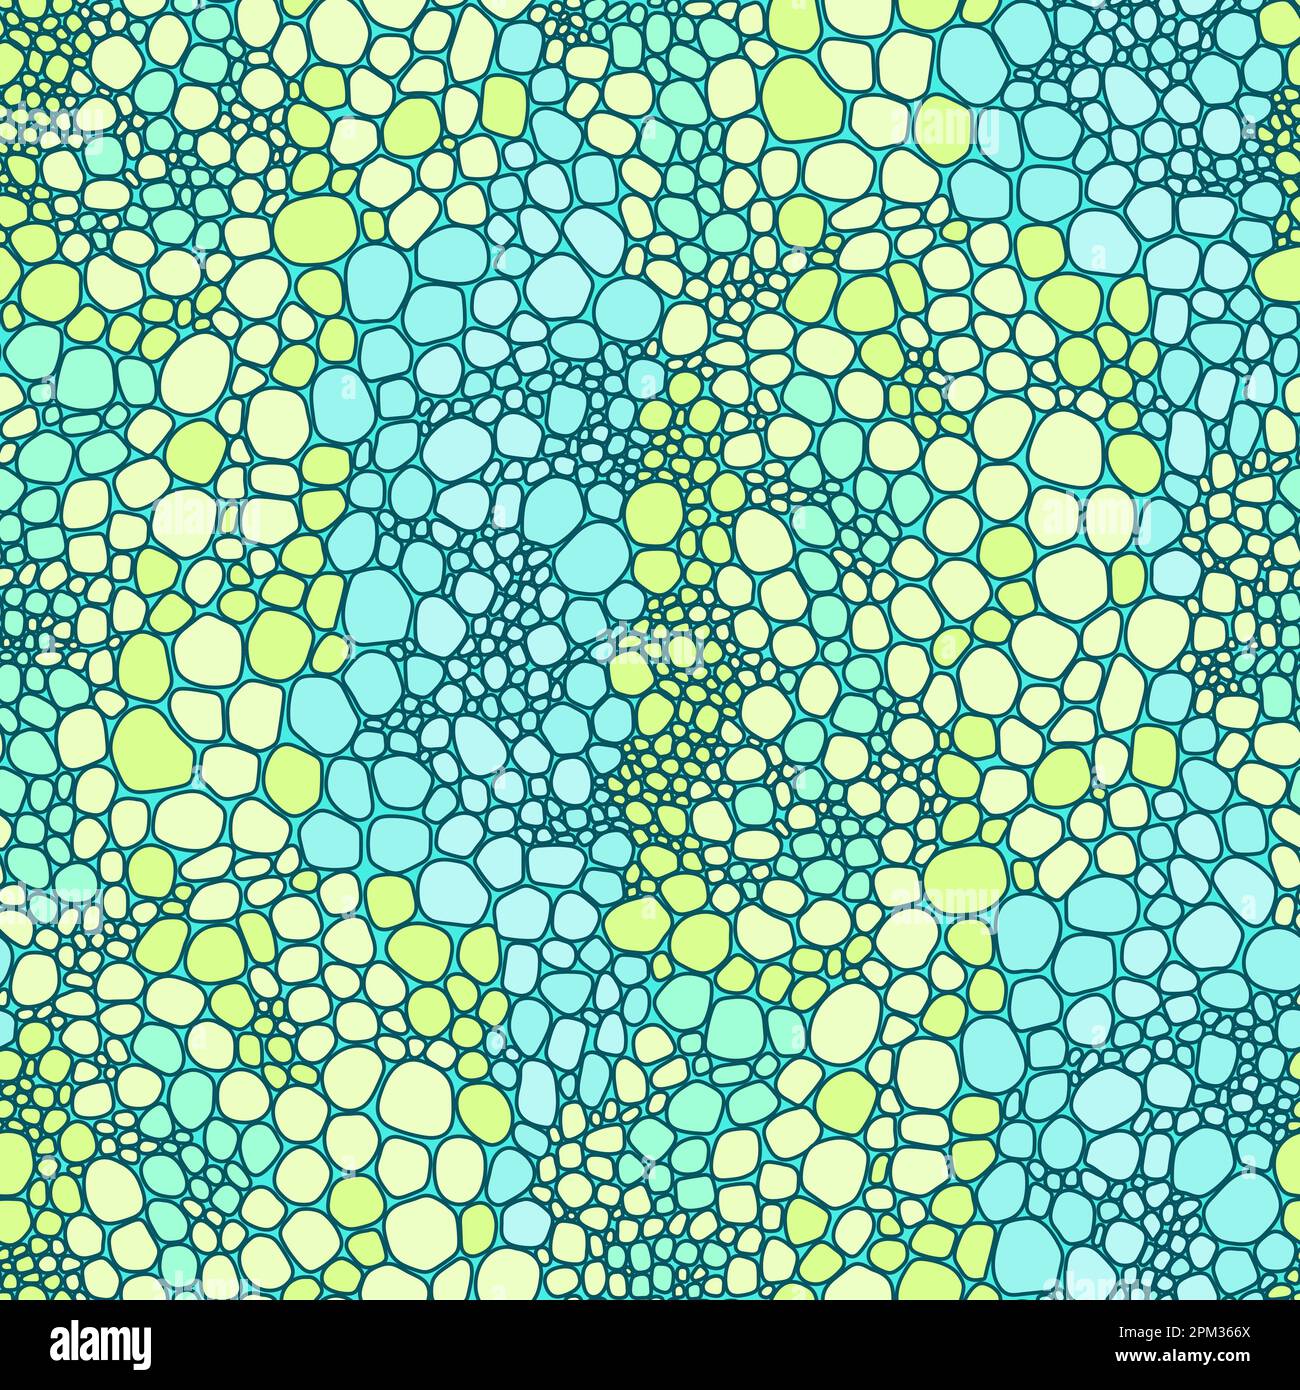 https://c8.alamy.com/comp/2PM366X/seamless-pattern-reptile-scales-endless-skin-vector-background-chameleon-skin-2PM366X.jpg